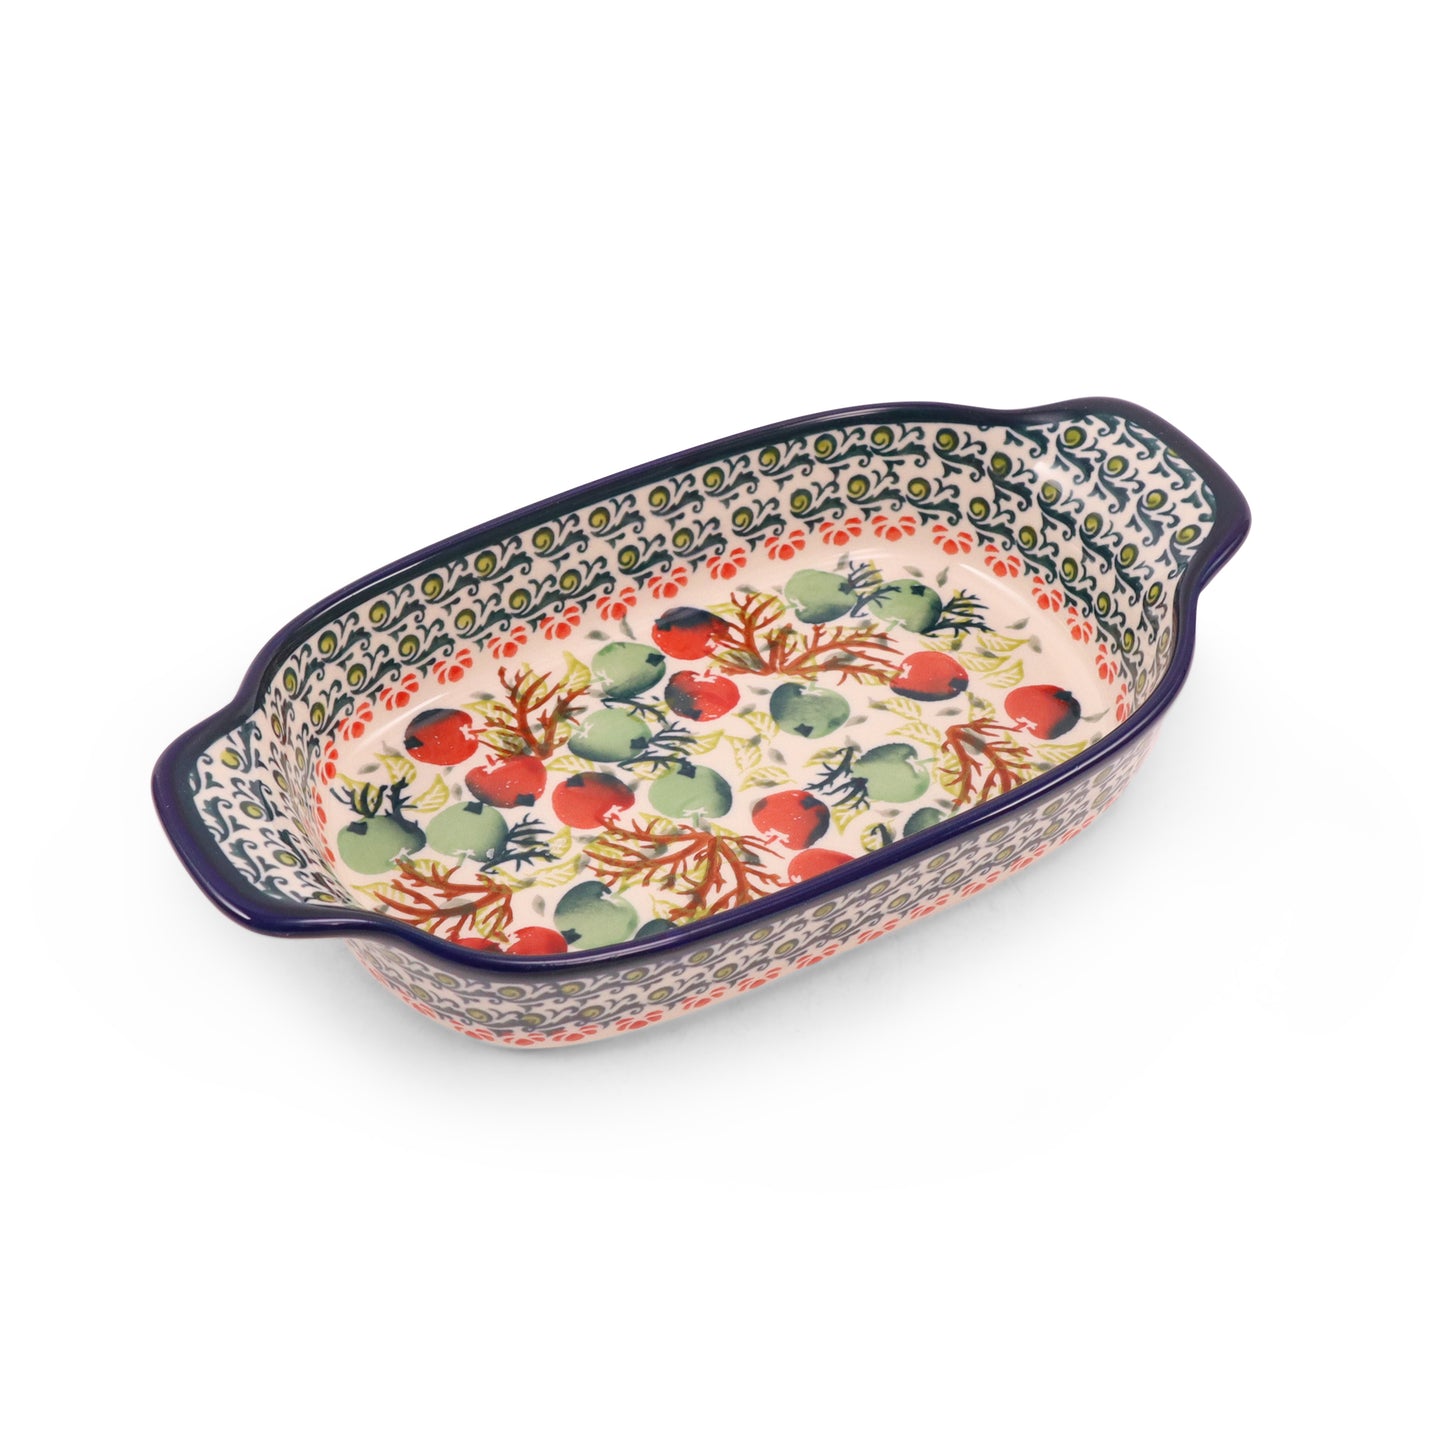 10"x5.5" Oval Serving Dish. Pattern: Orchard